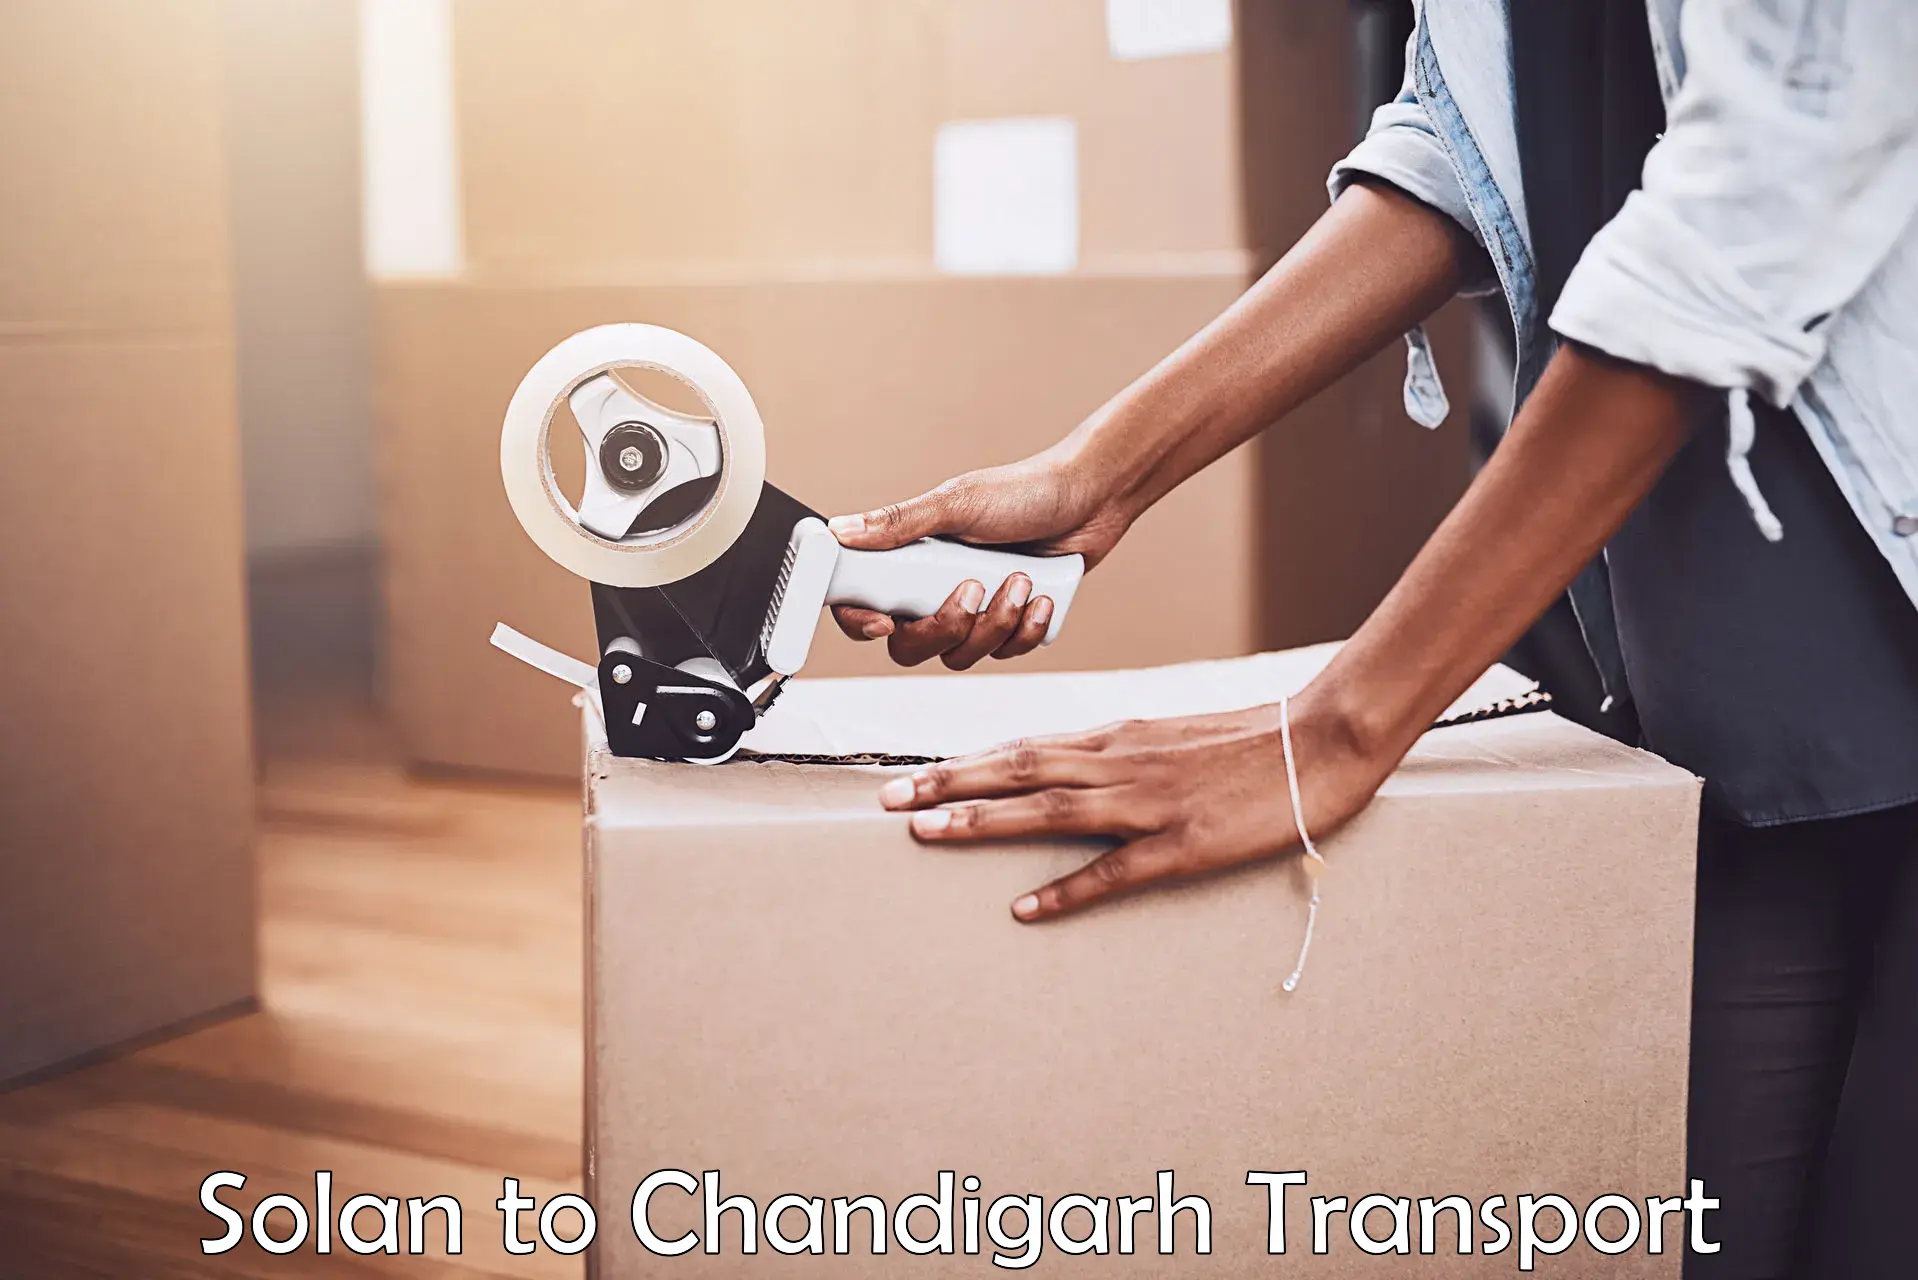 Pick up transport service Solan to Chandigarh